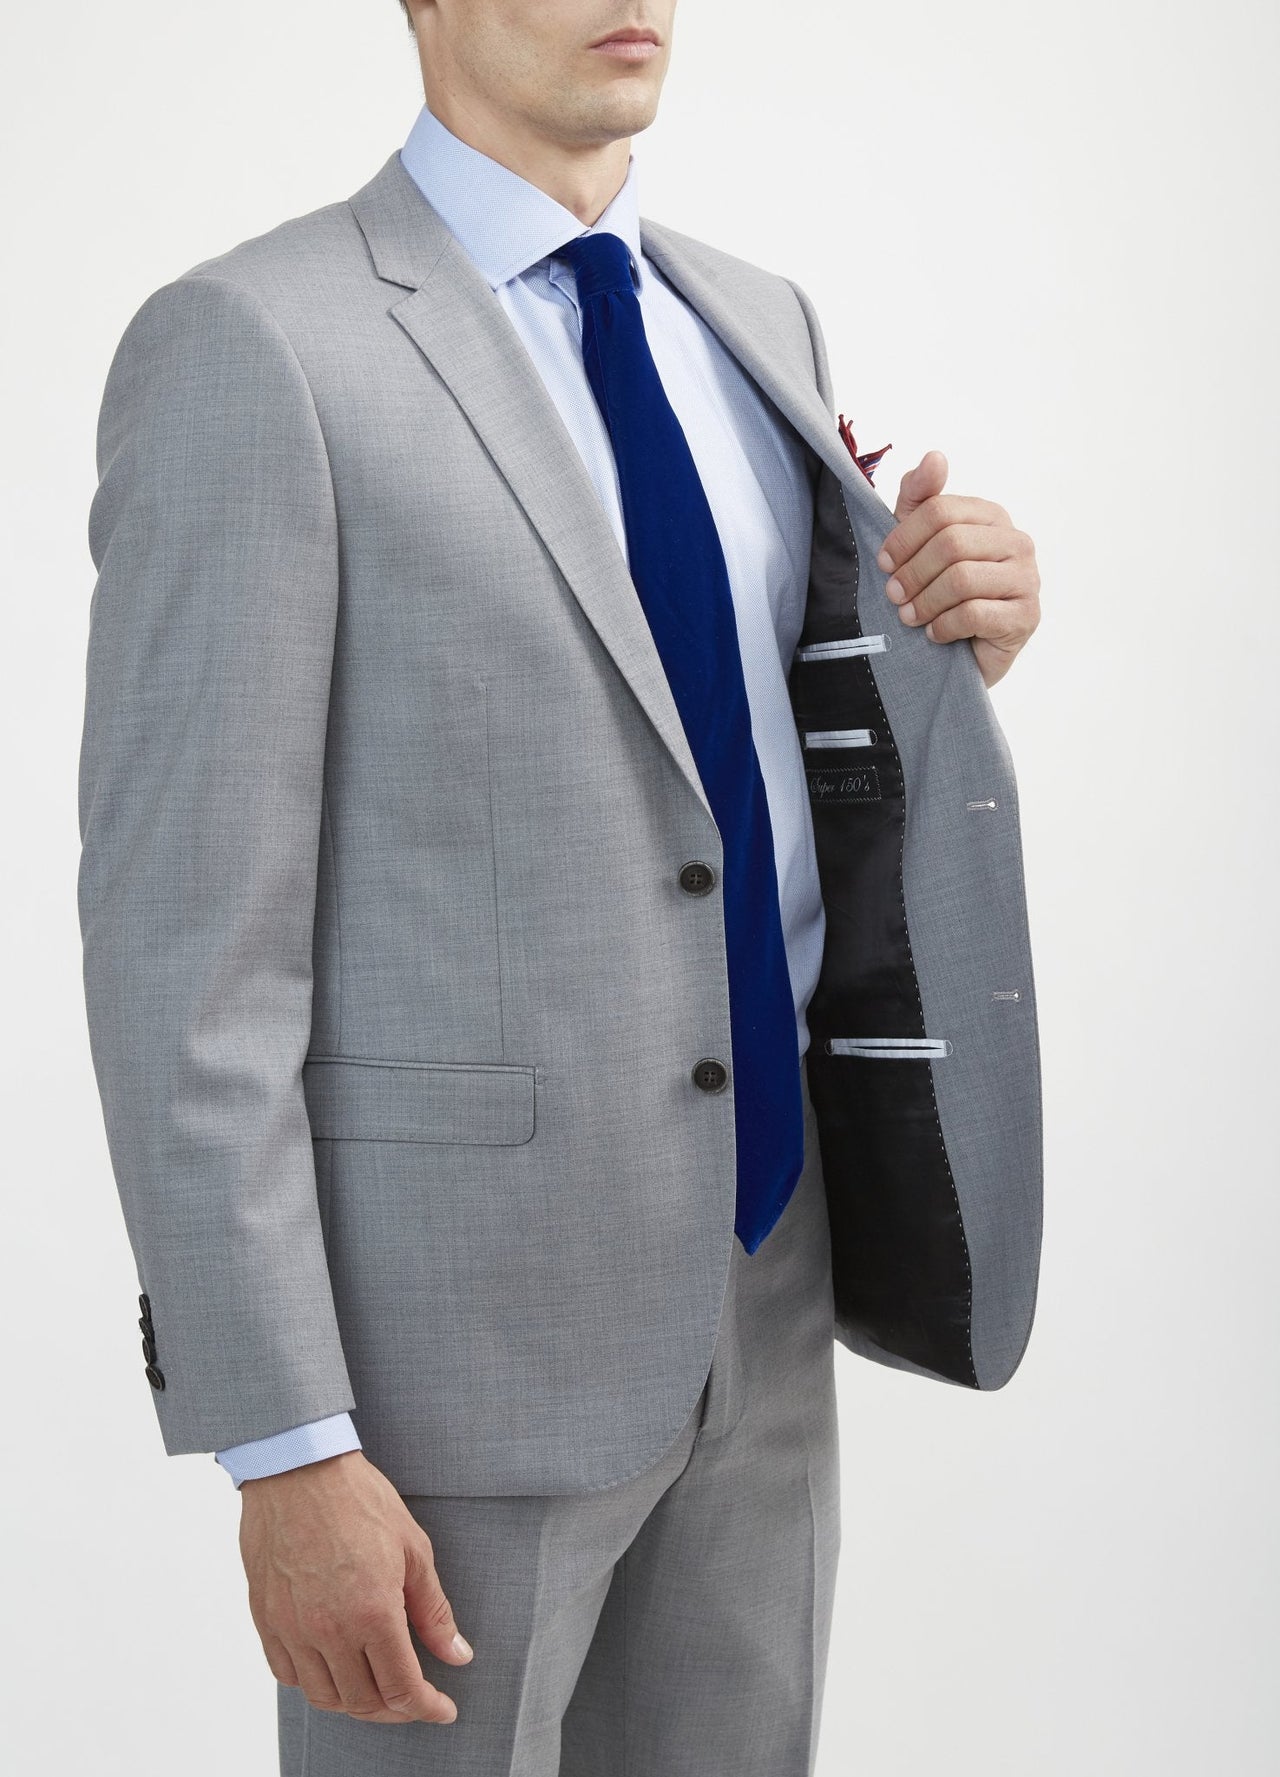 Lite Grey Suit Jacket Made From 100% Merino Wool - Tomasso Black